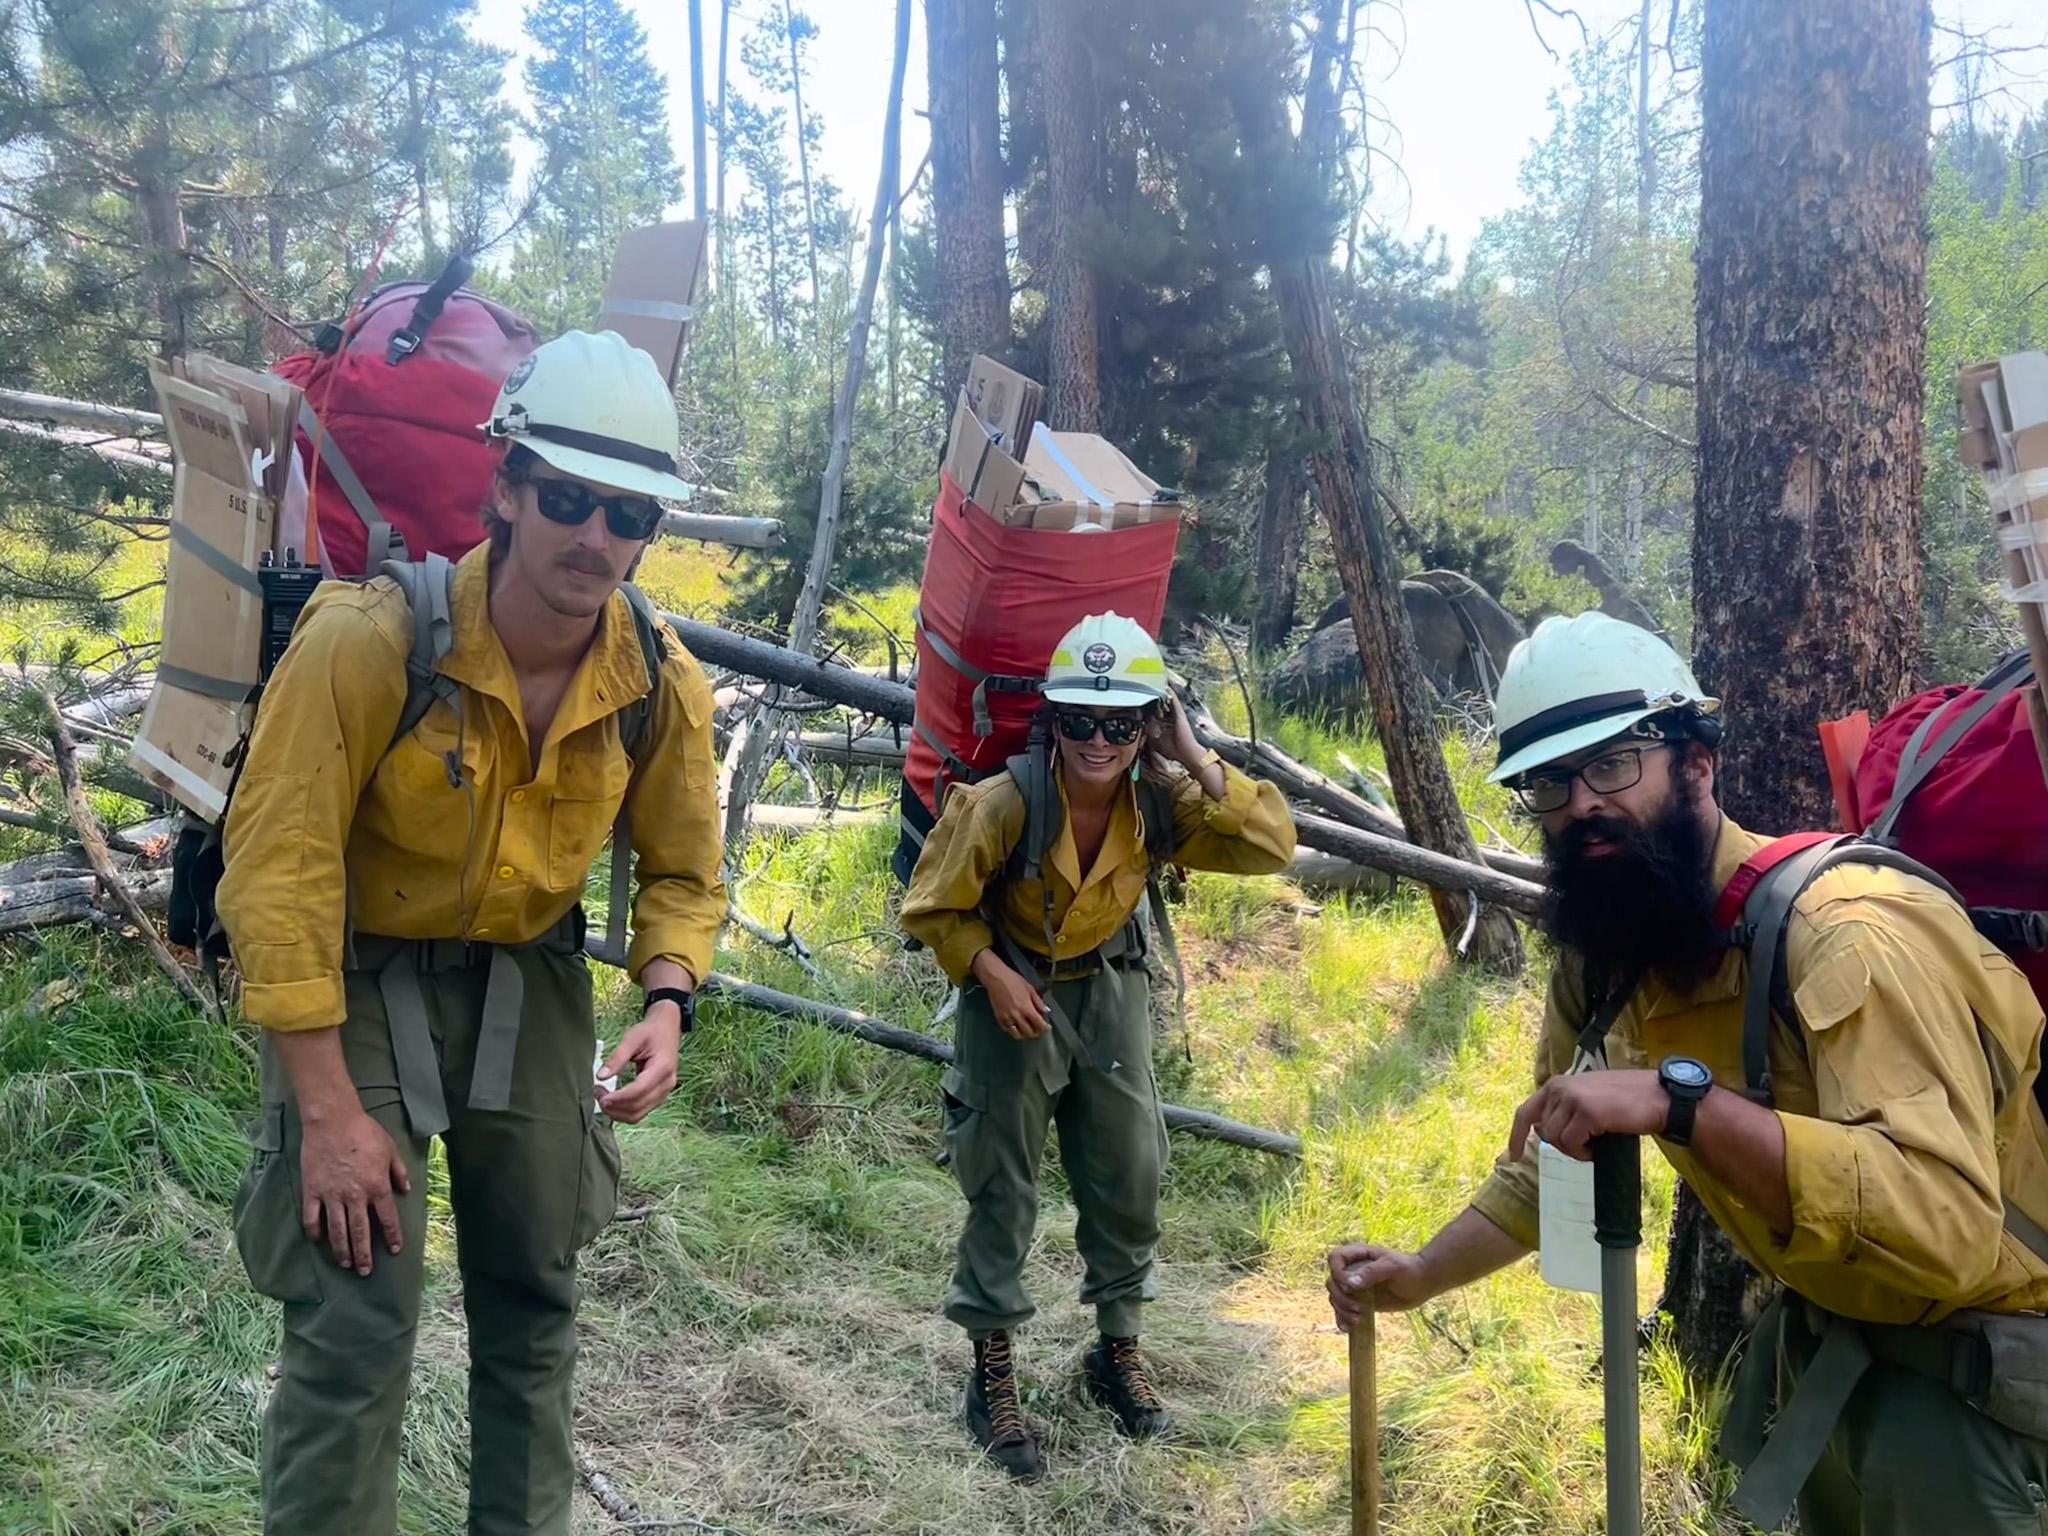 Three wildland firefighters in their firefighting apparel carry their gear on their backs.